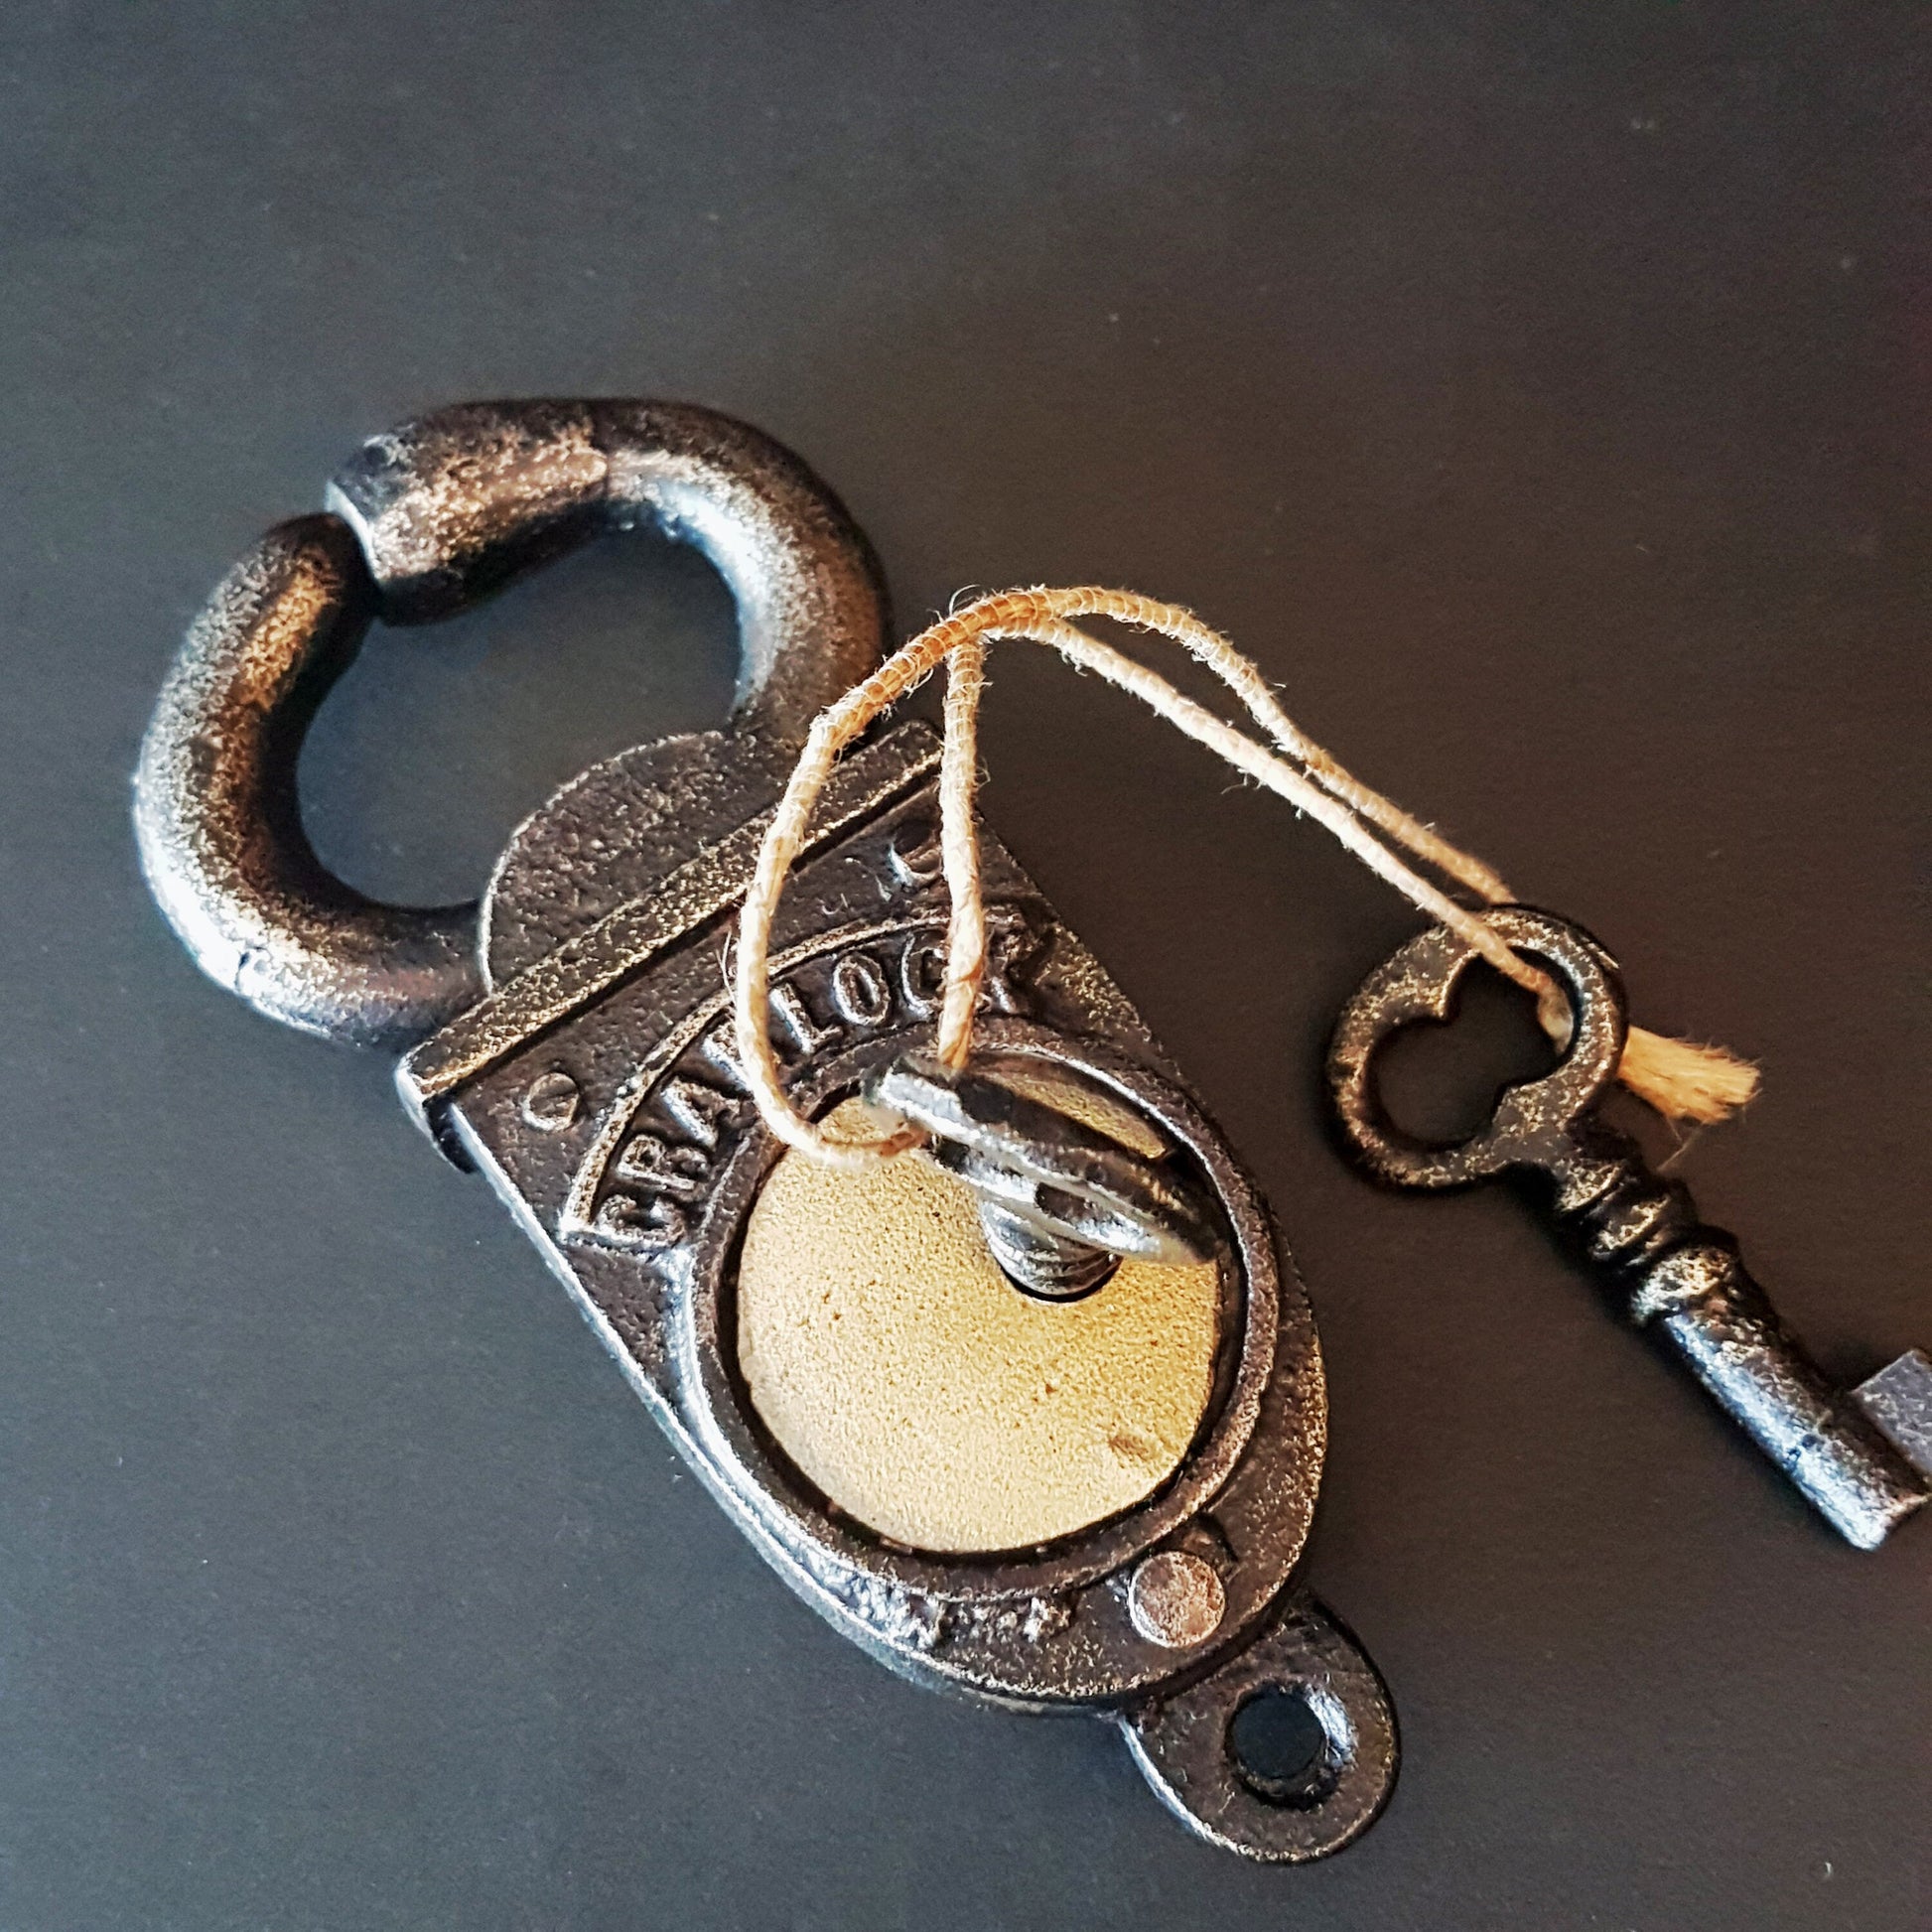 Pad lock antique look iron & bronze 2 key Crab lock. Functional lock with 2 keys.Collectible handmade lock in a vintage lobster claw design. - Vintage India Ca